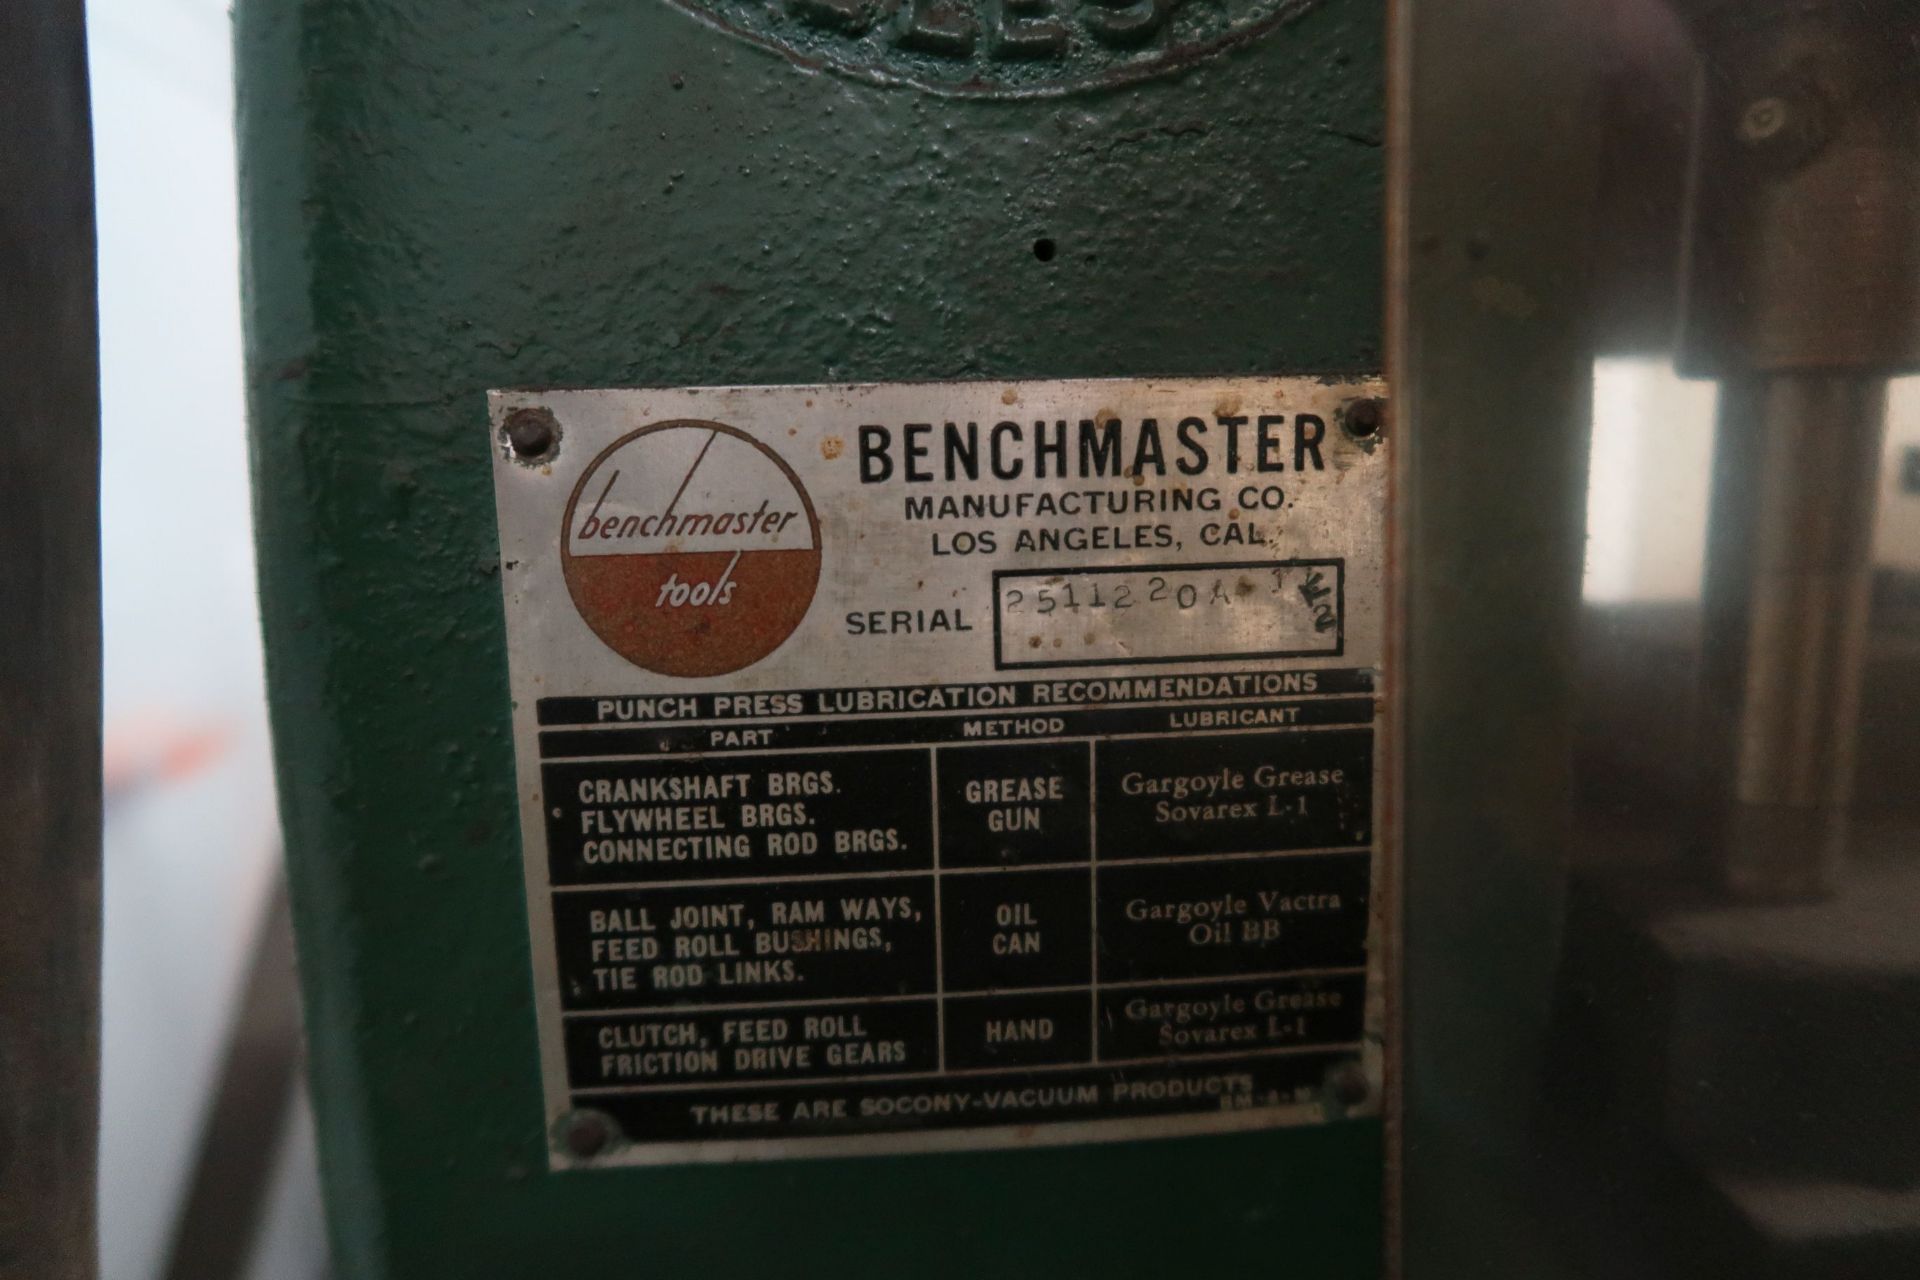 4 TON BENCHMASTER PUNCH PRESS; S/N 2511220A - Image 2 of 3